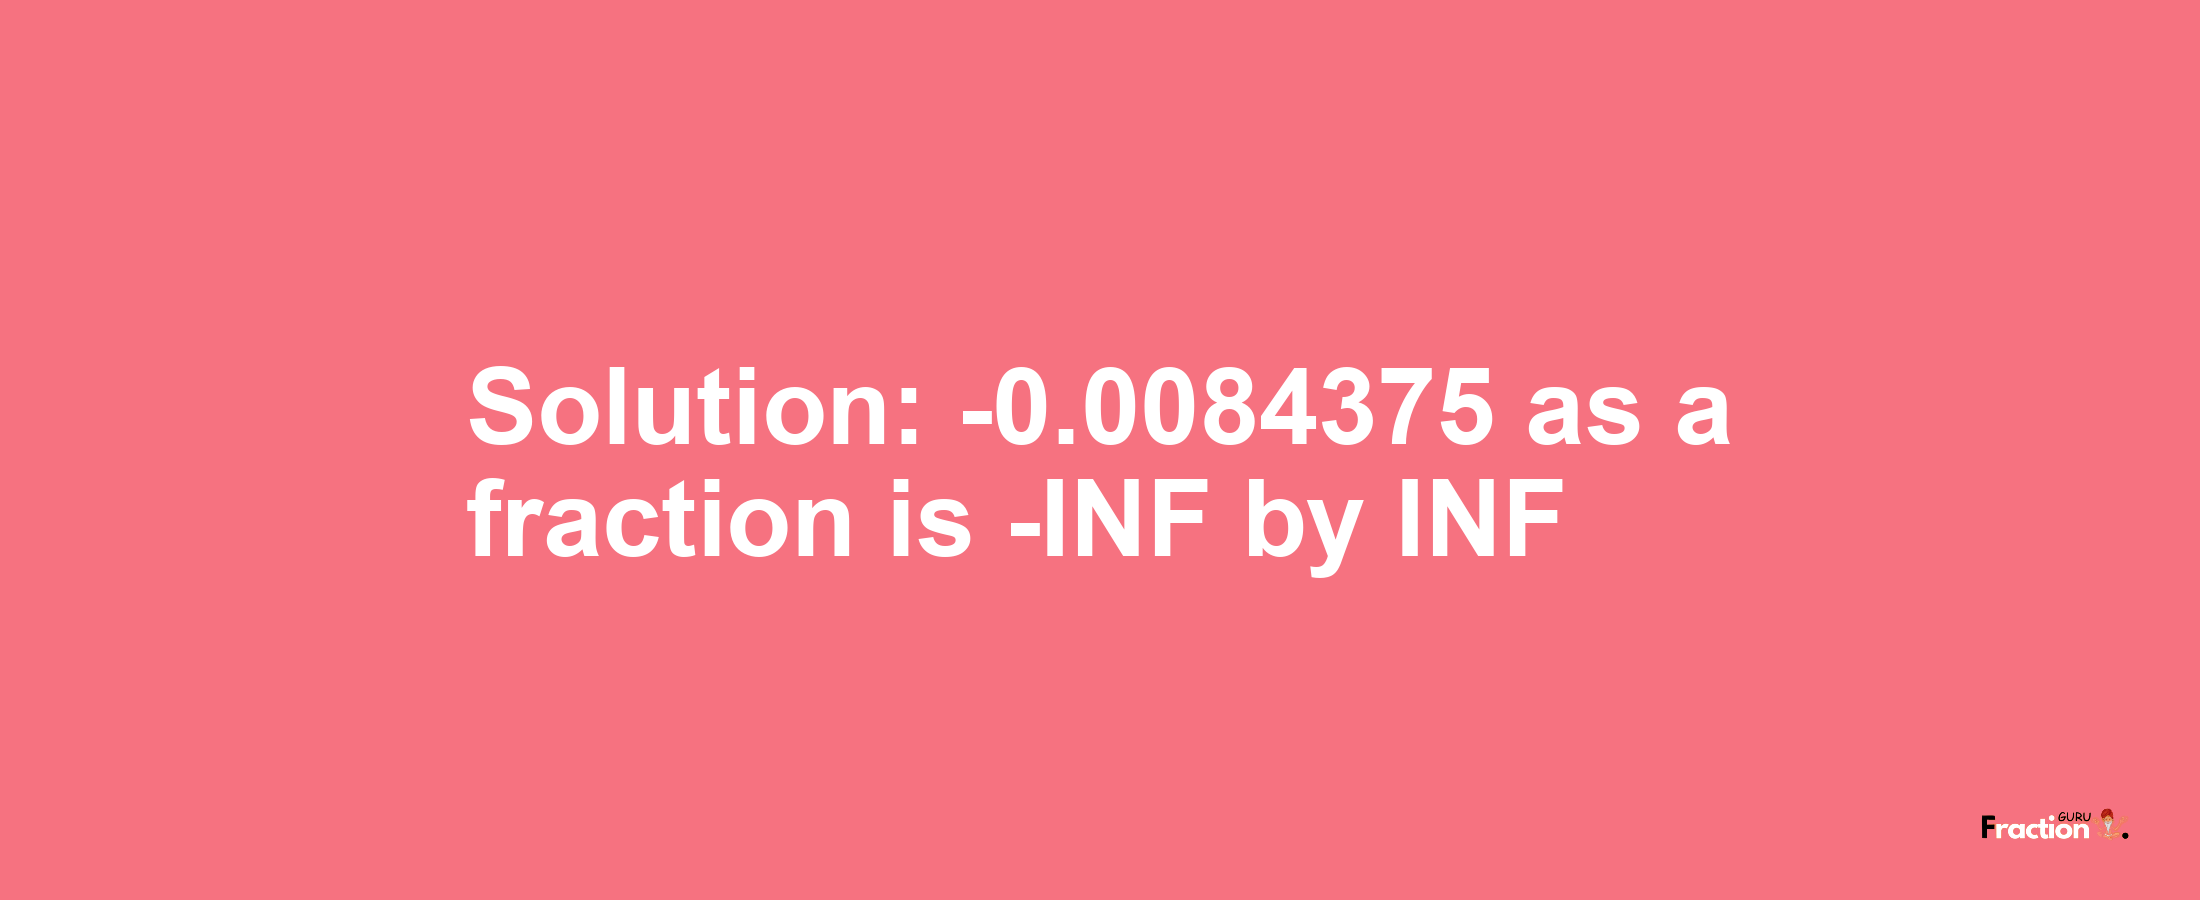 Solution:-0.0084375 as a fraction is -INF/INF